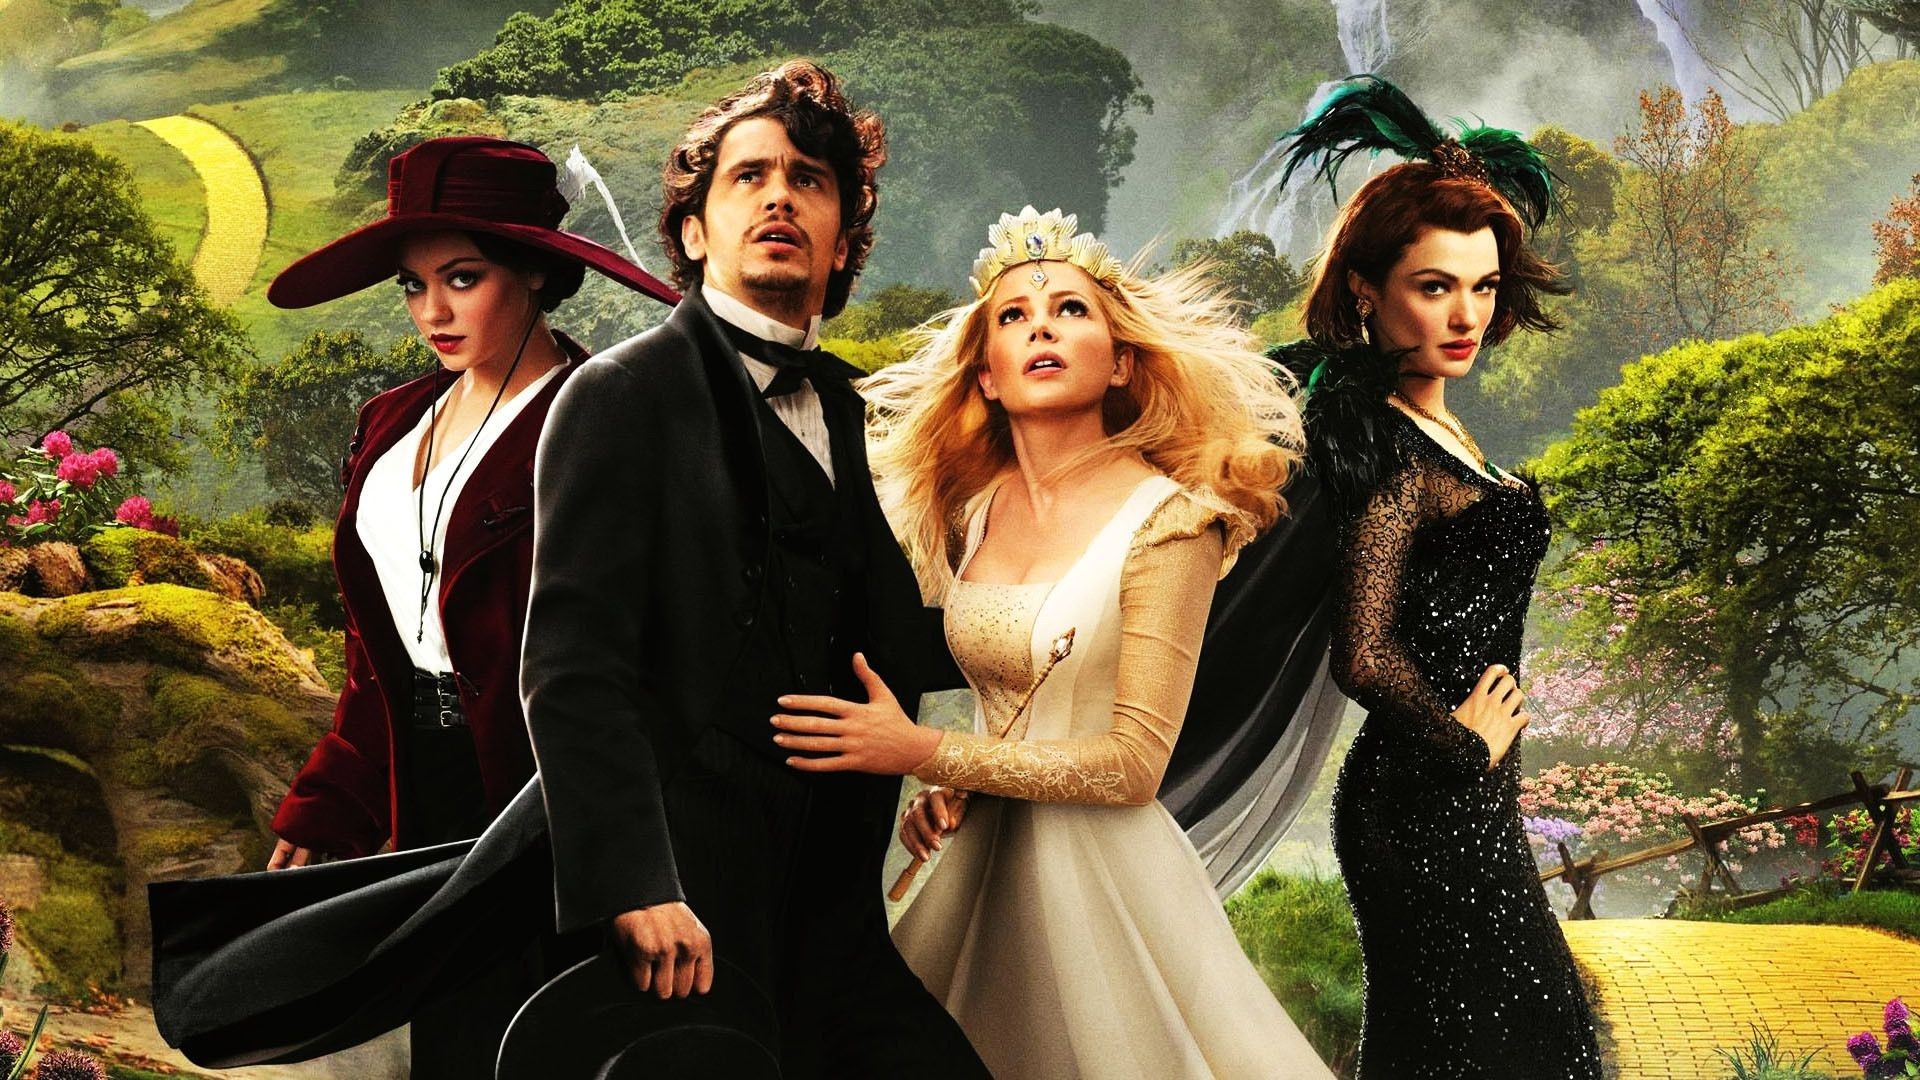 General 1920x1080 Oz the Great and Powerful Mila Kunis James Franco Michelle Williams Rachel Weisz movies women men dress hat women with hats looking up blonde